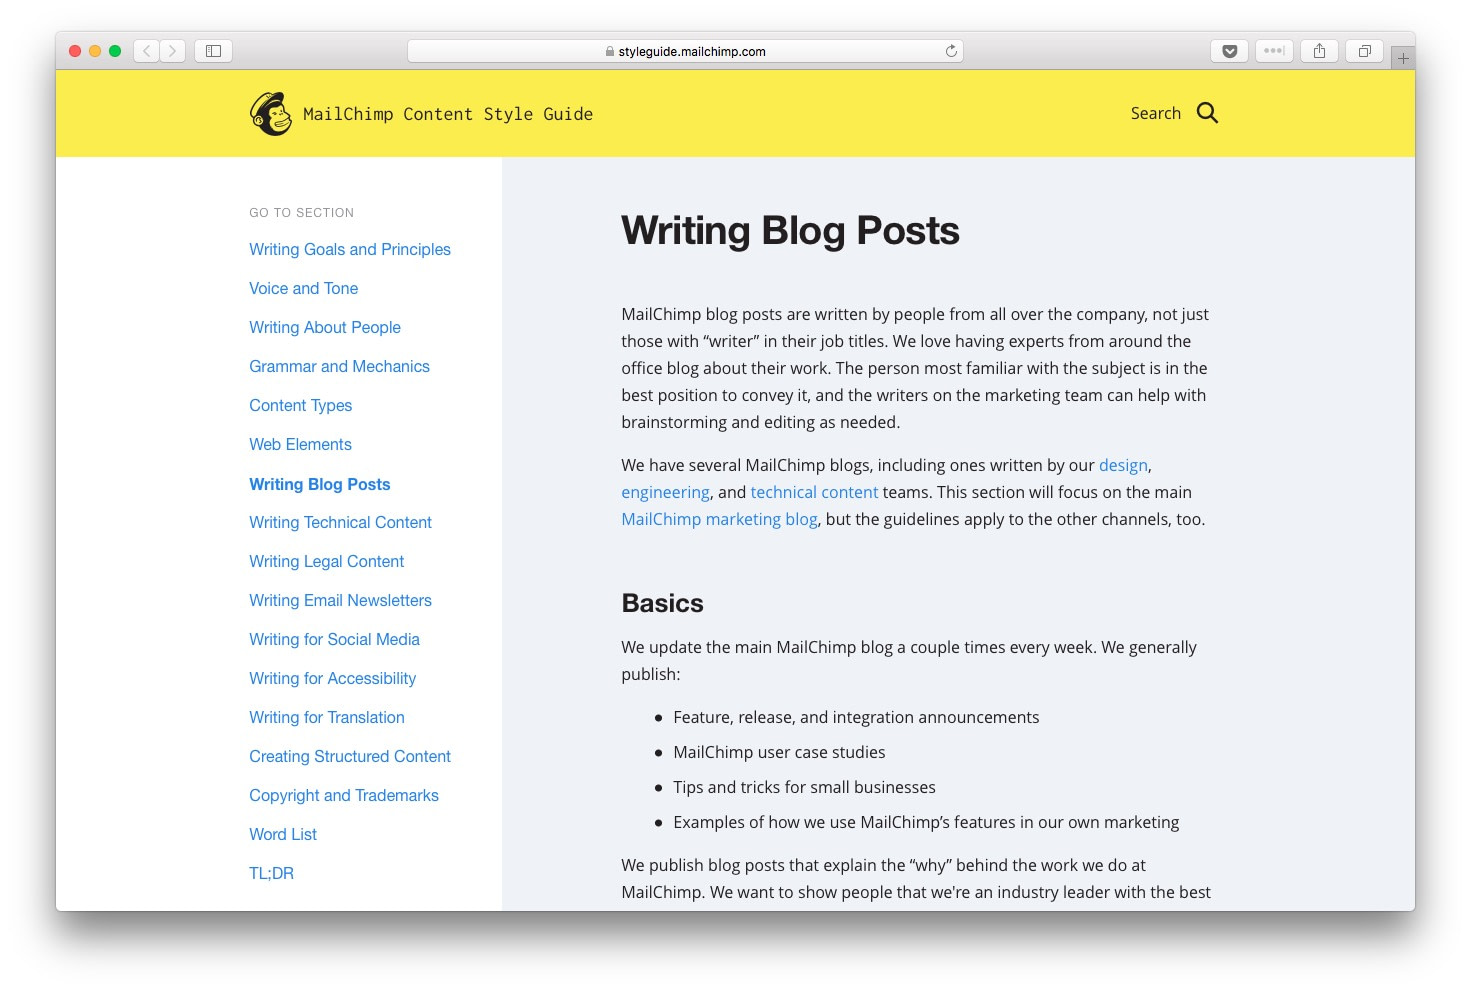 Blog style guide by MailChimp